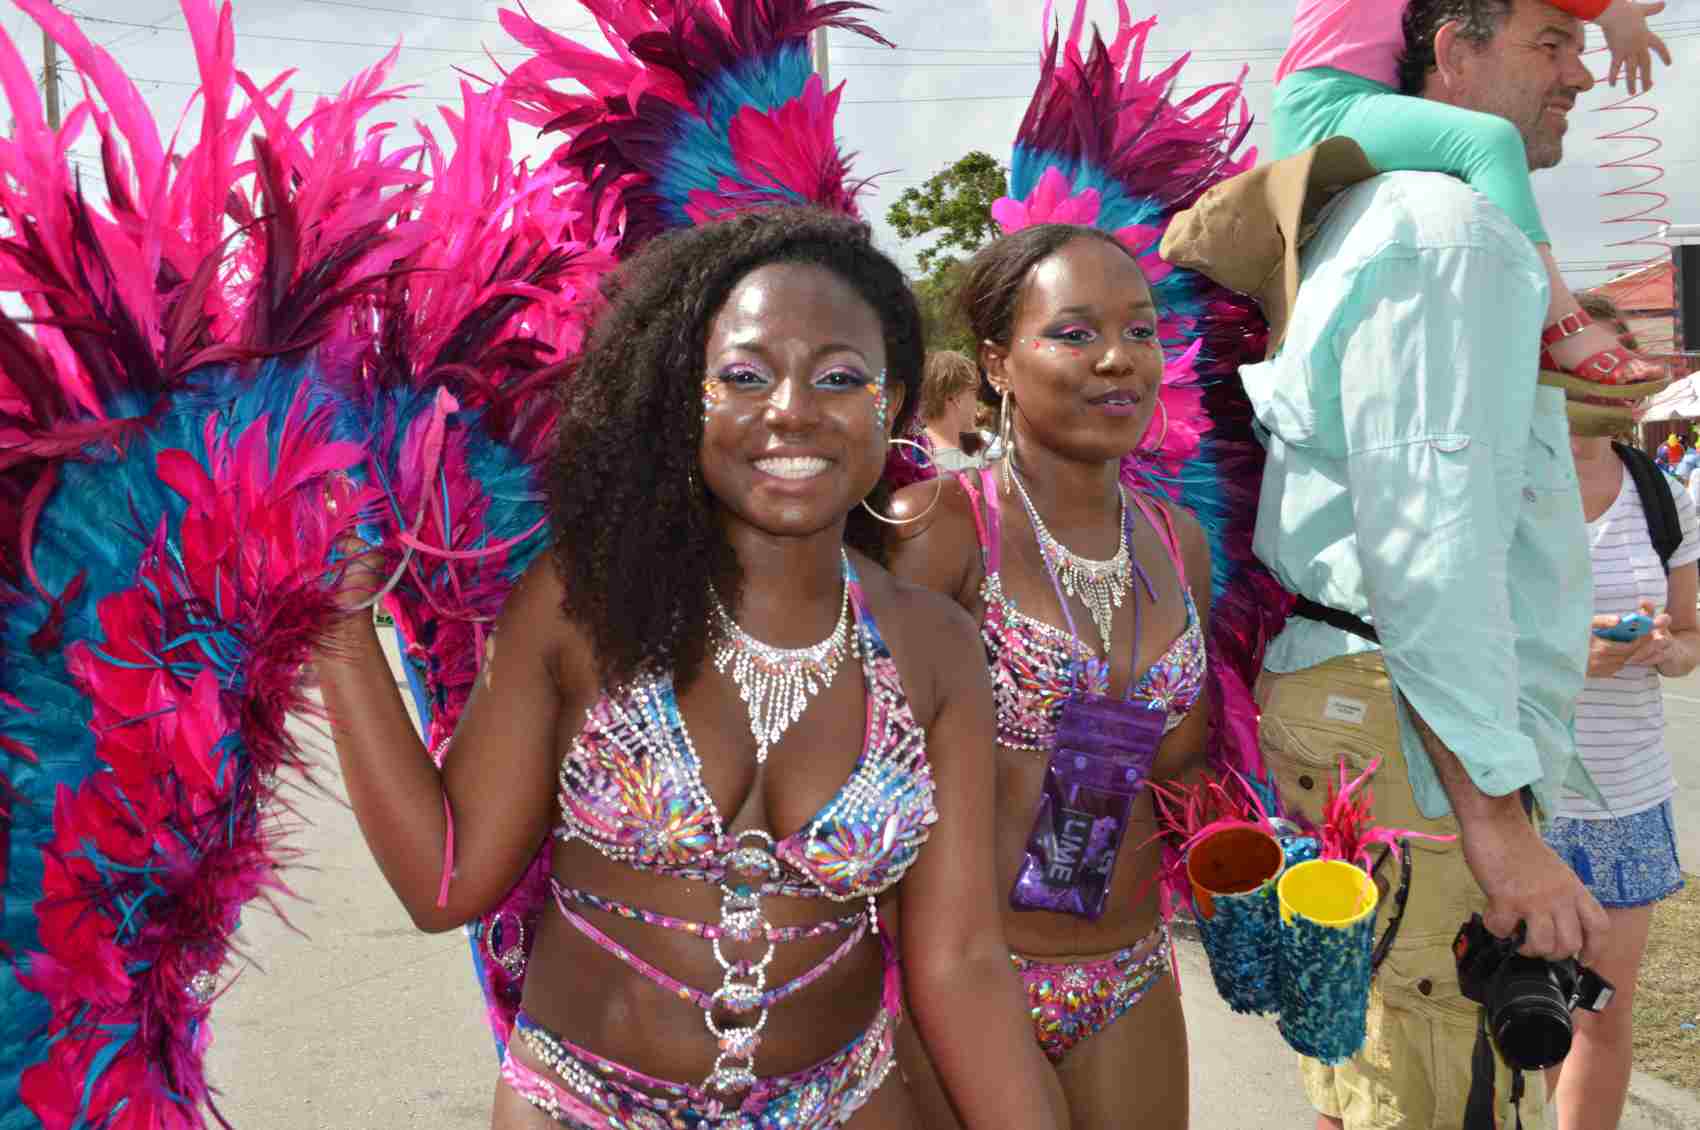 (English) The Carnival in Barbados / Crop Over